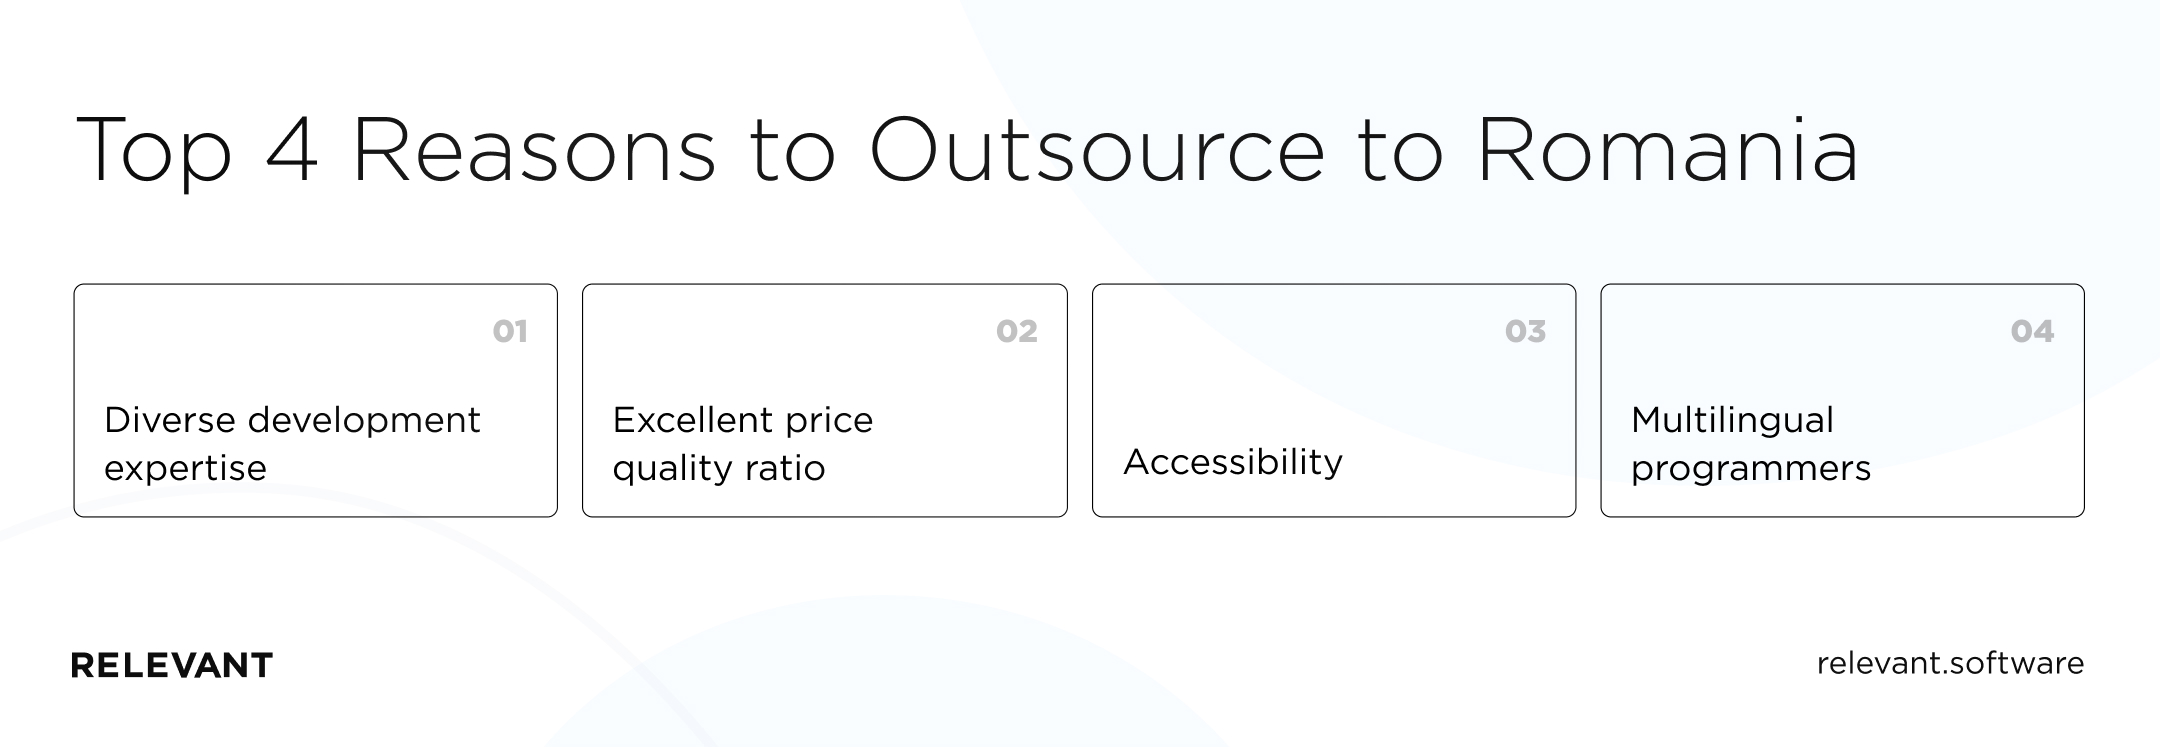 top reasons to outsource to Romania